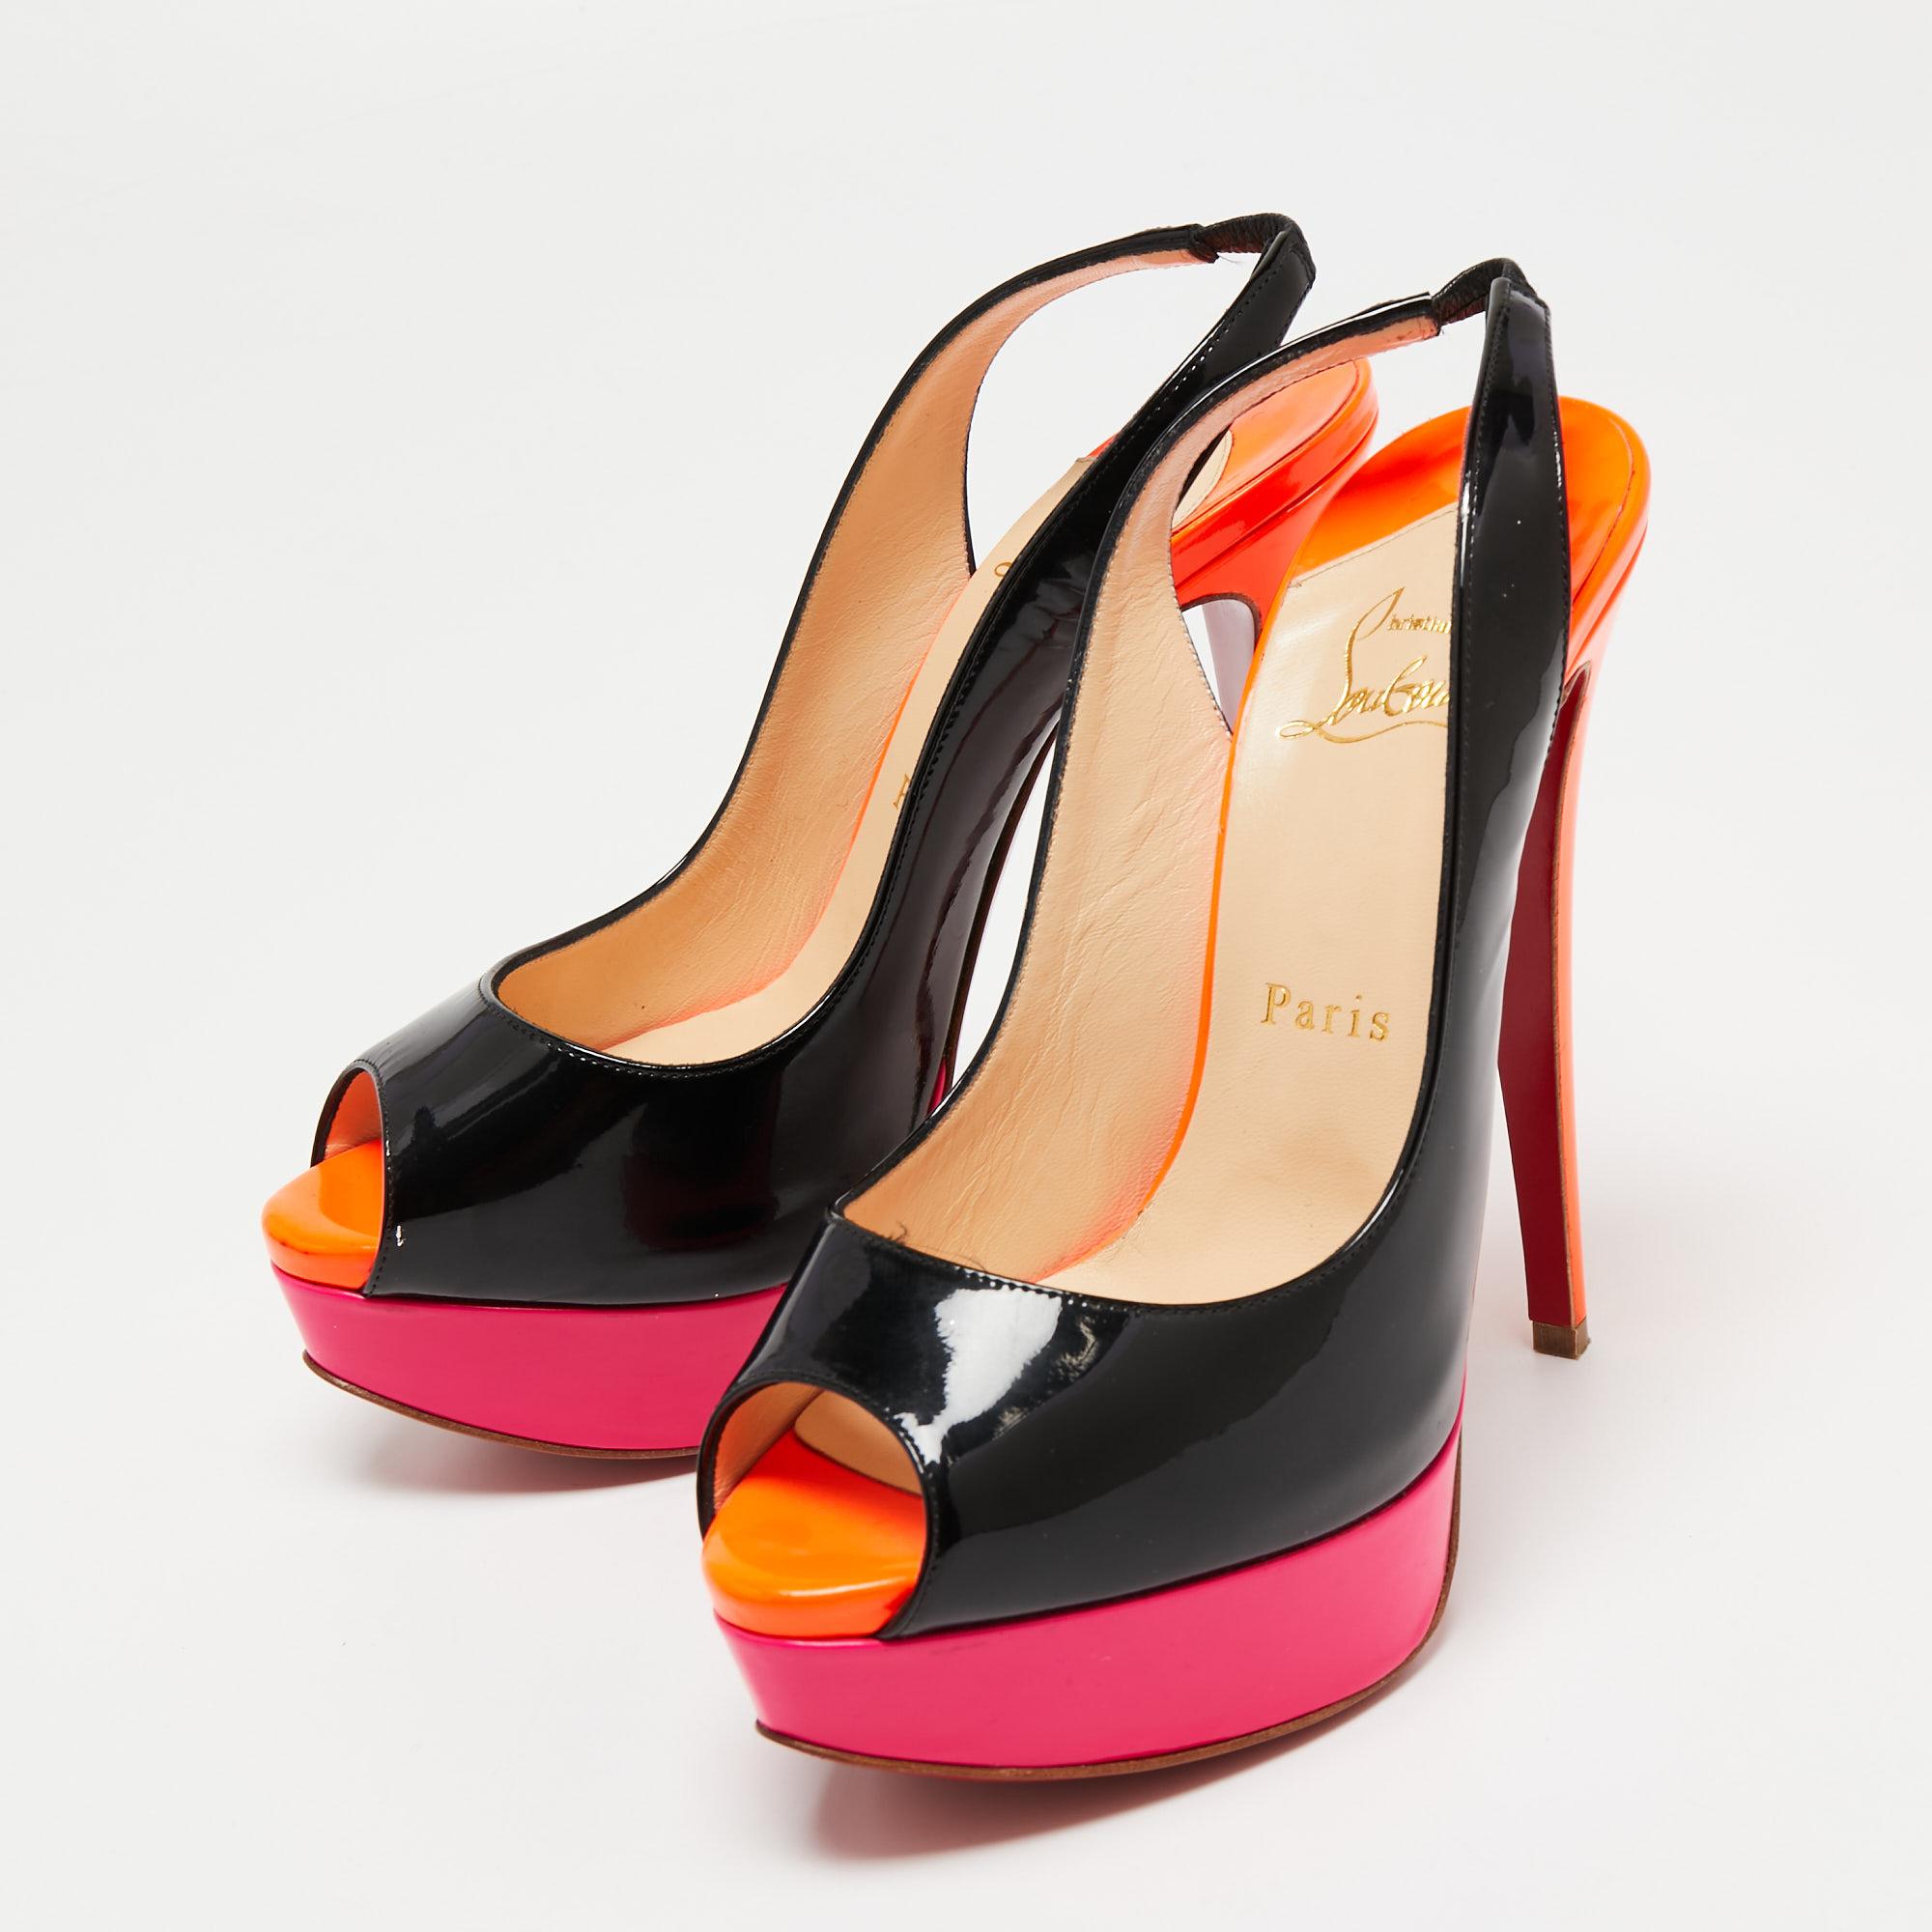 Stand out from the crowd with this classy pair of Louboutins that exude high fashion with class. Crafted from patent leather, this is a creation from their Lady Peep collection. It is eye-catching with a tri-color silhouette and exhibits peep toes